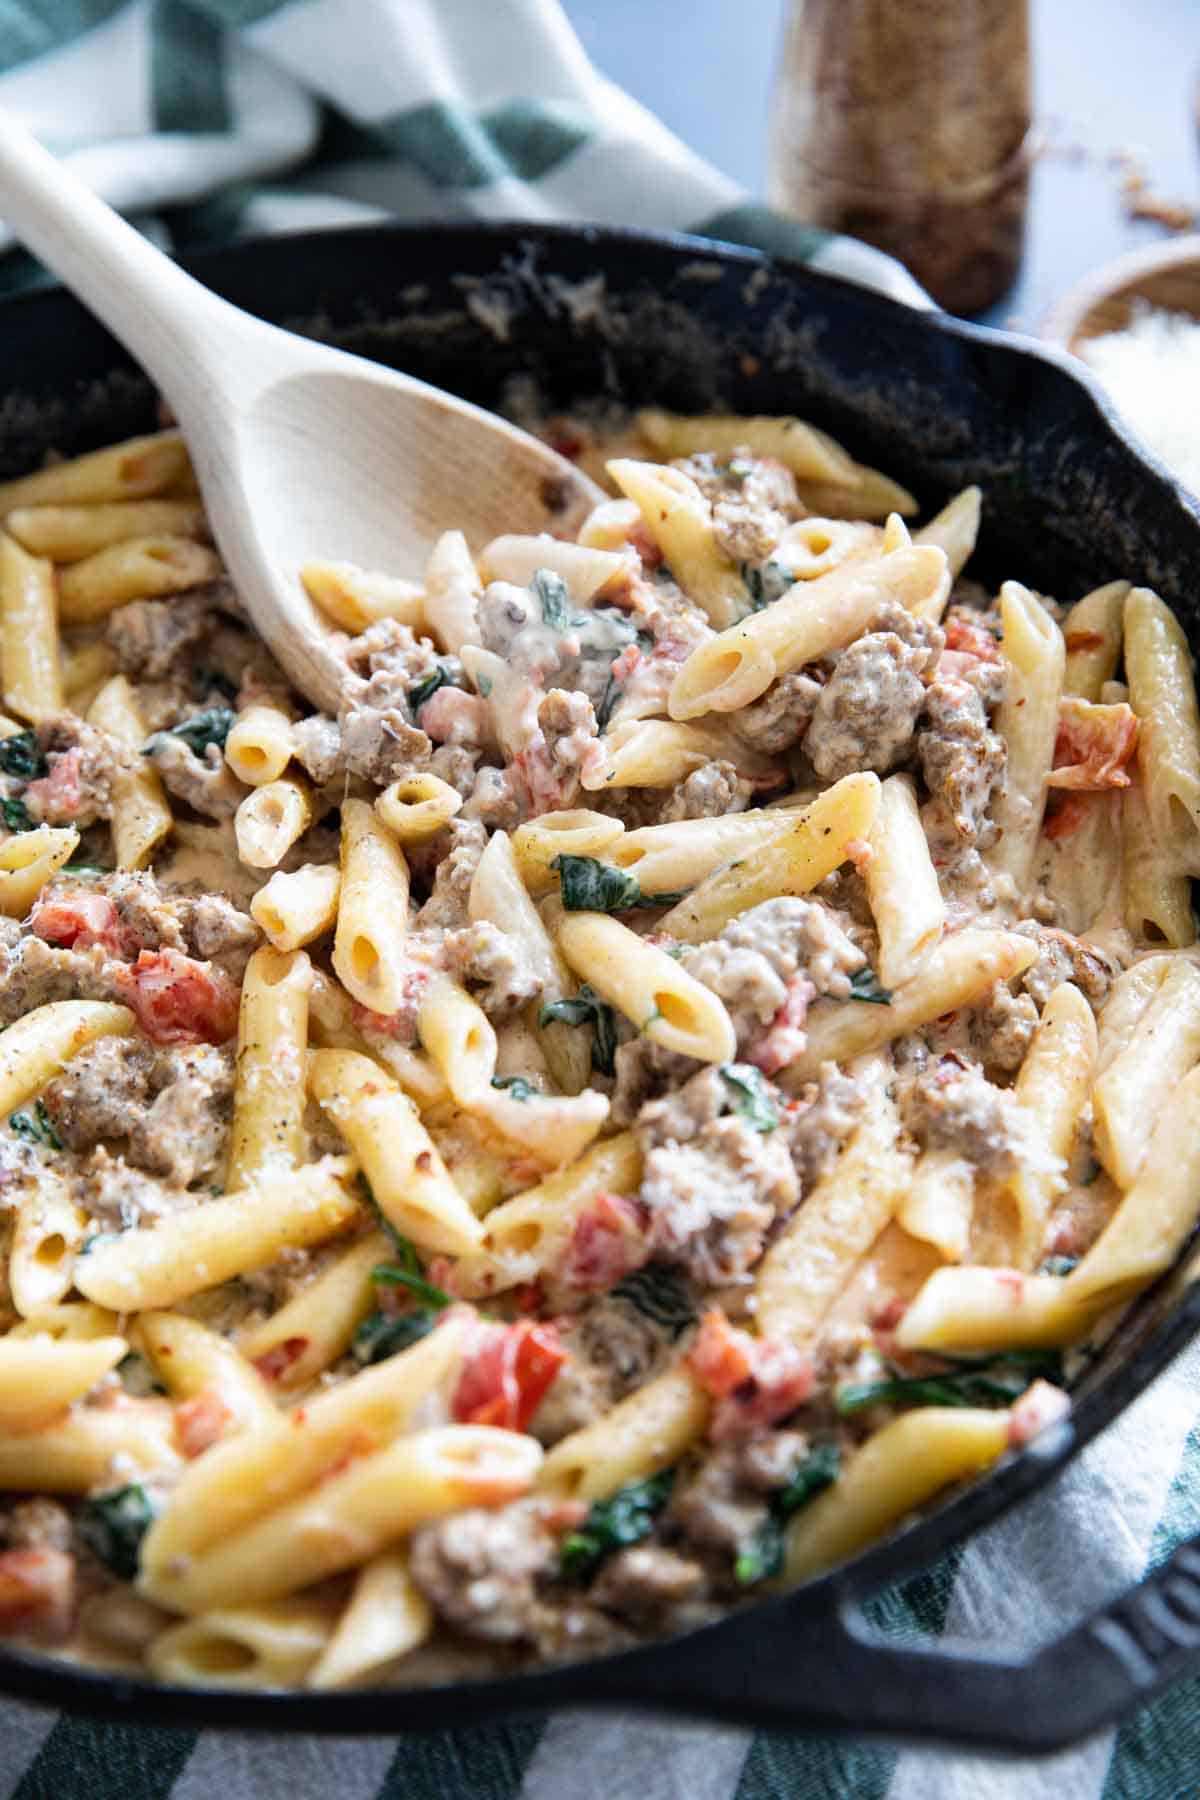 Tuscan pasta with sausage in a cast iron skillet.